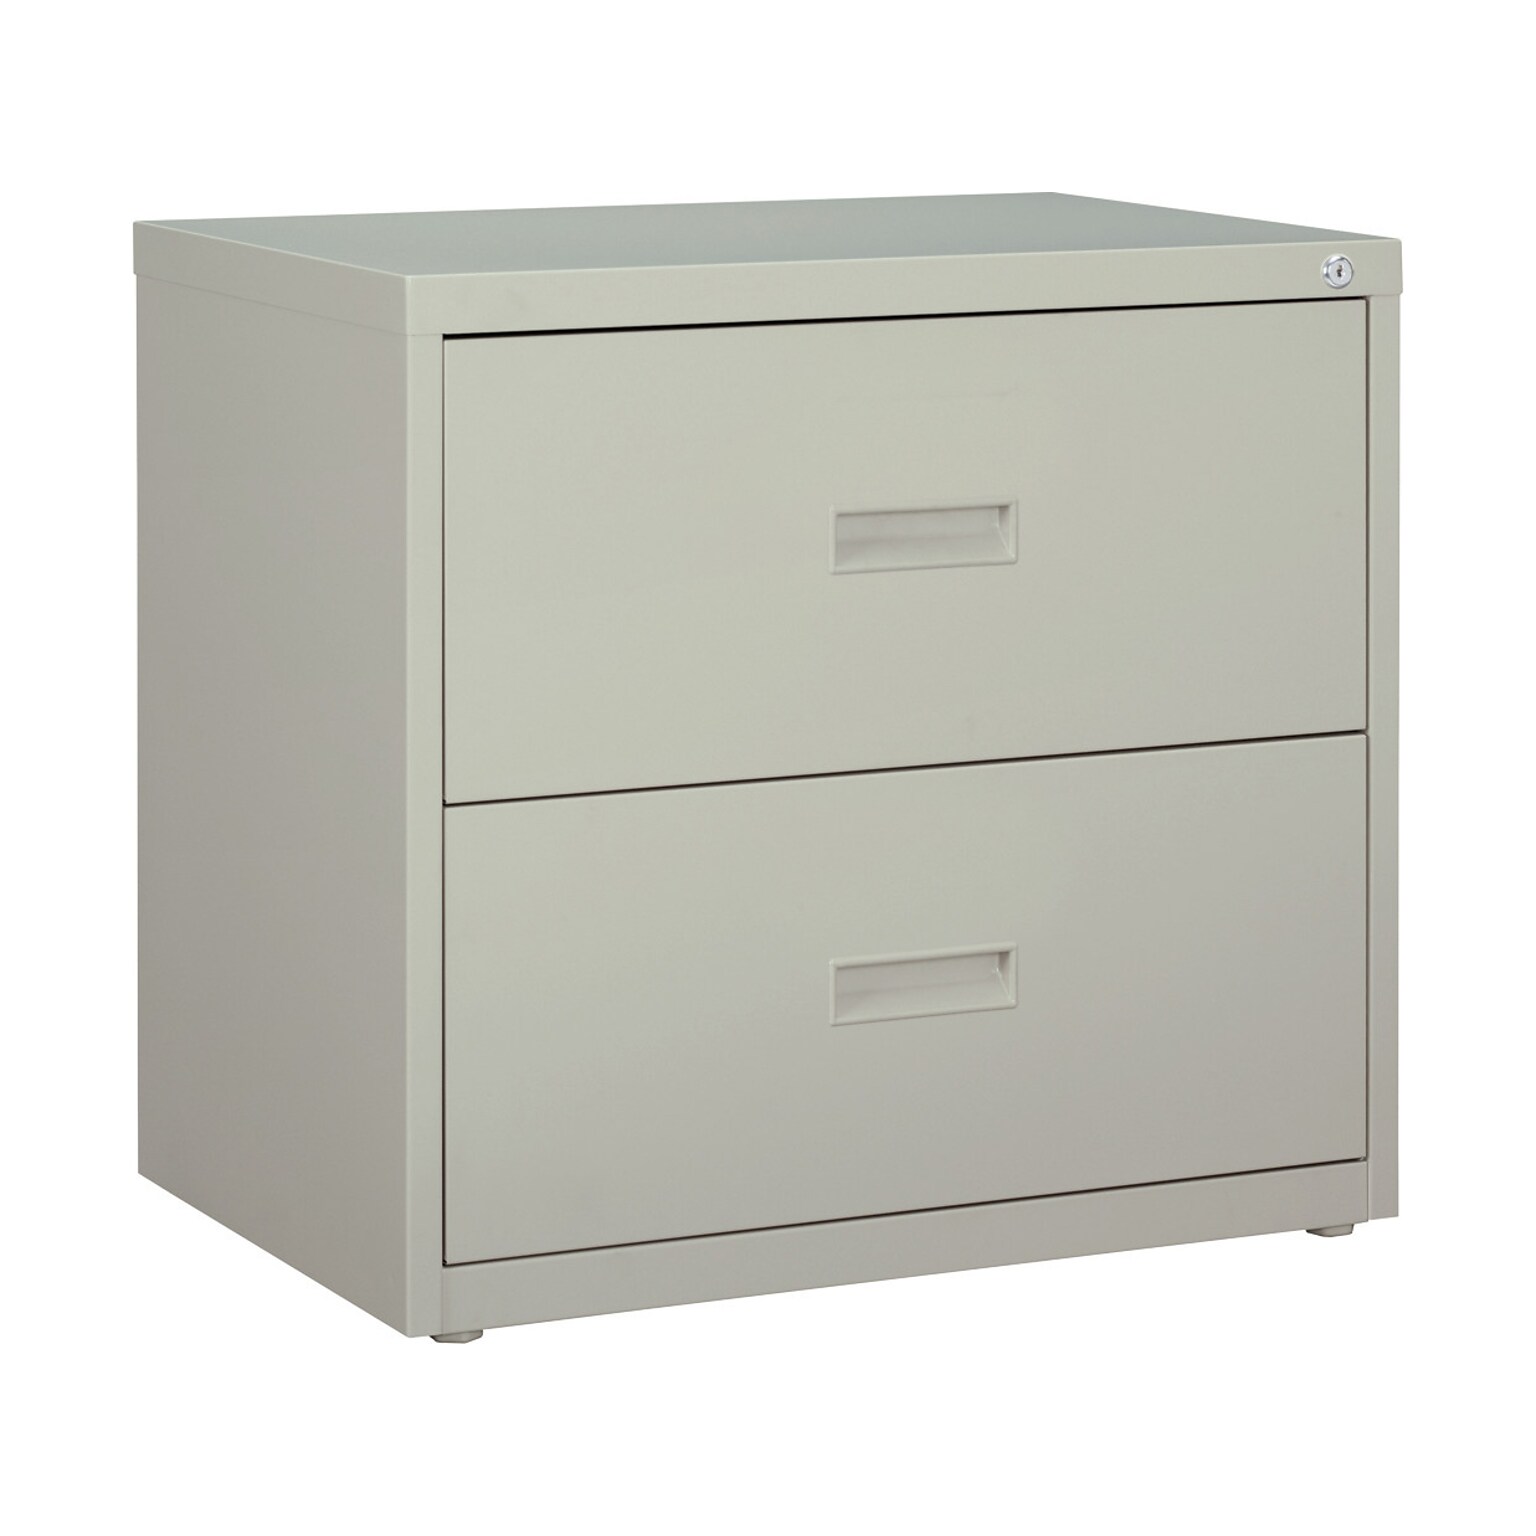 Hirsh HL1000 Series 2-Drawer Lateral File Cabinet, Letter/Legal Size, Lockable, 28H x 30W x 18.63D, Light Gray (19439)